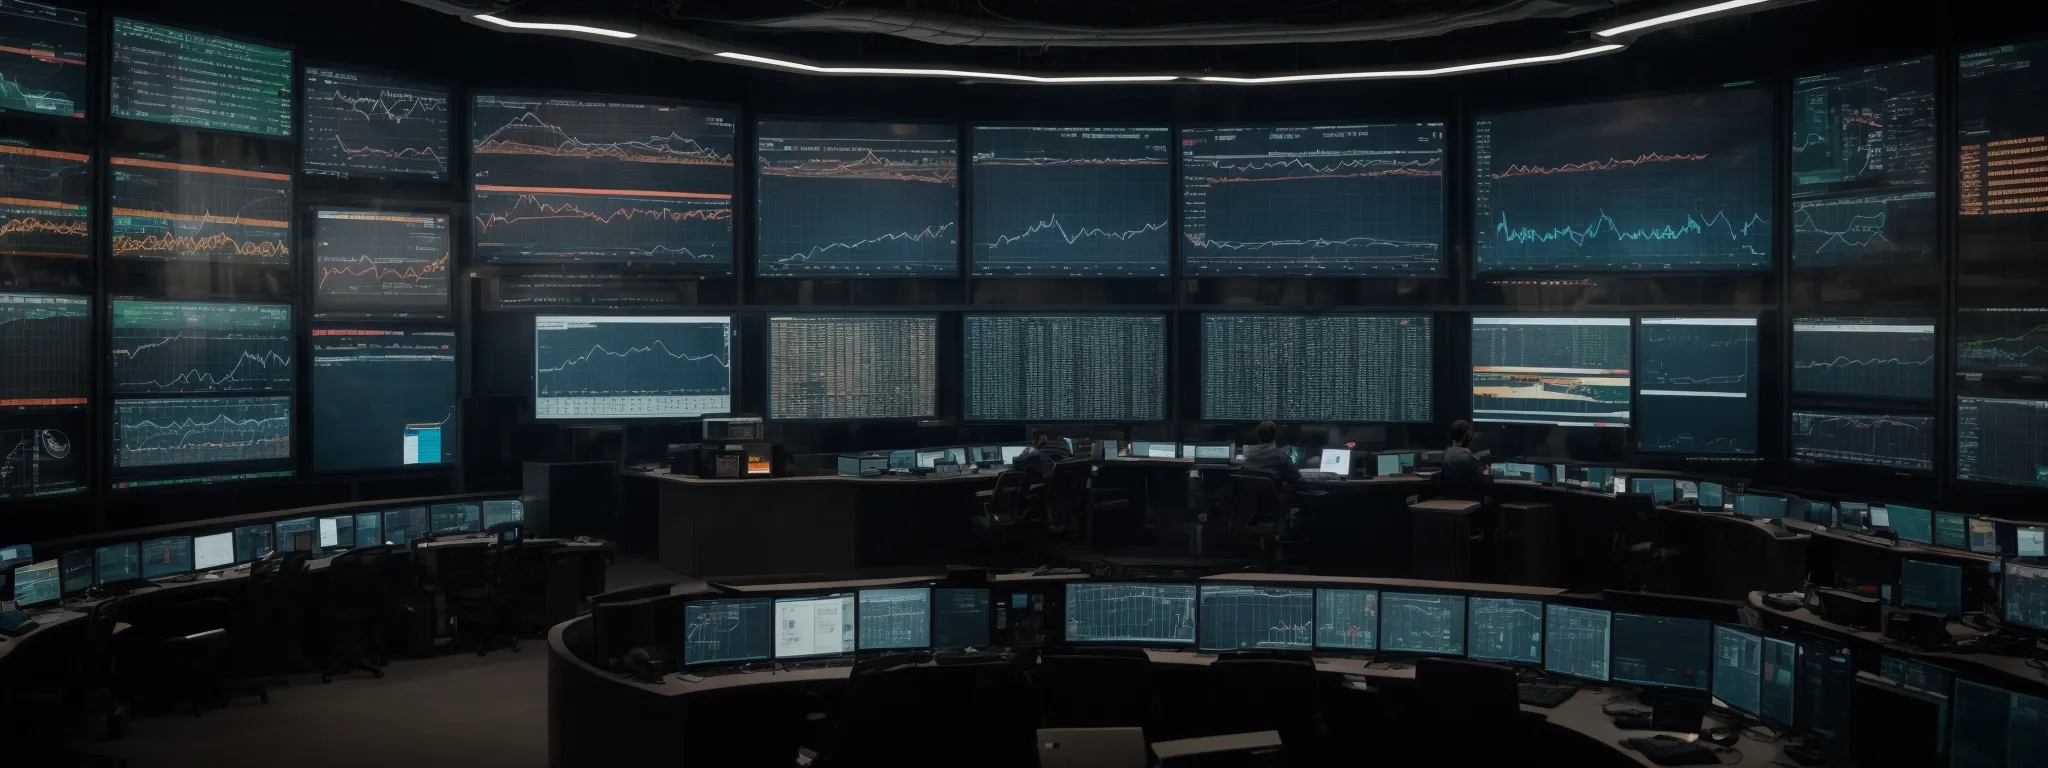 a modern control room with large screens displaying graphs and analytics for industrial optimization.